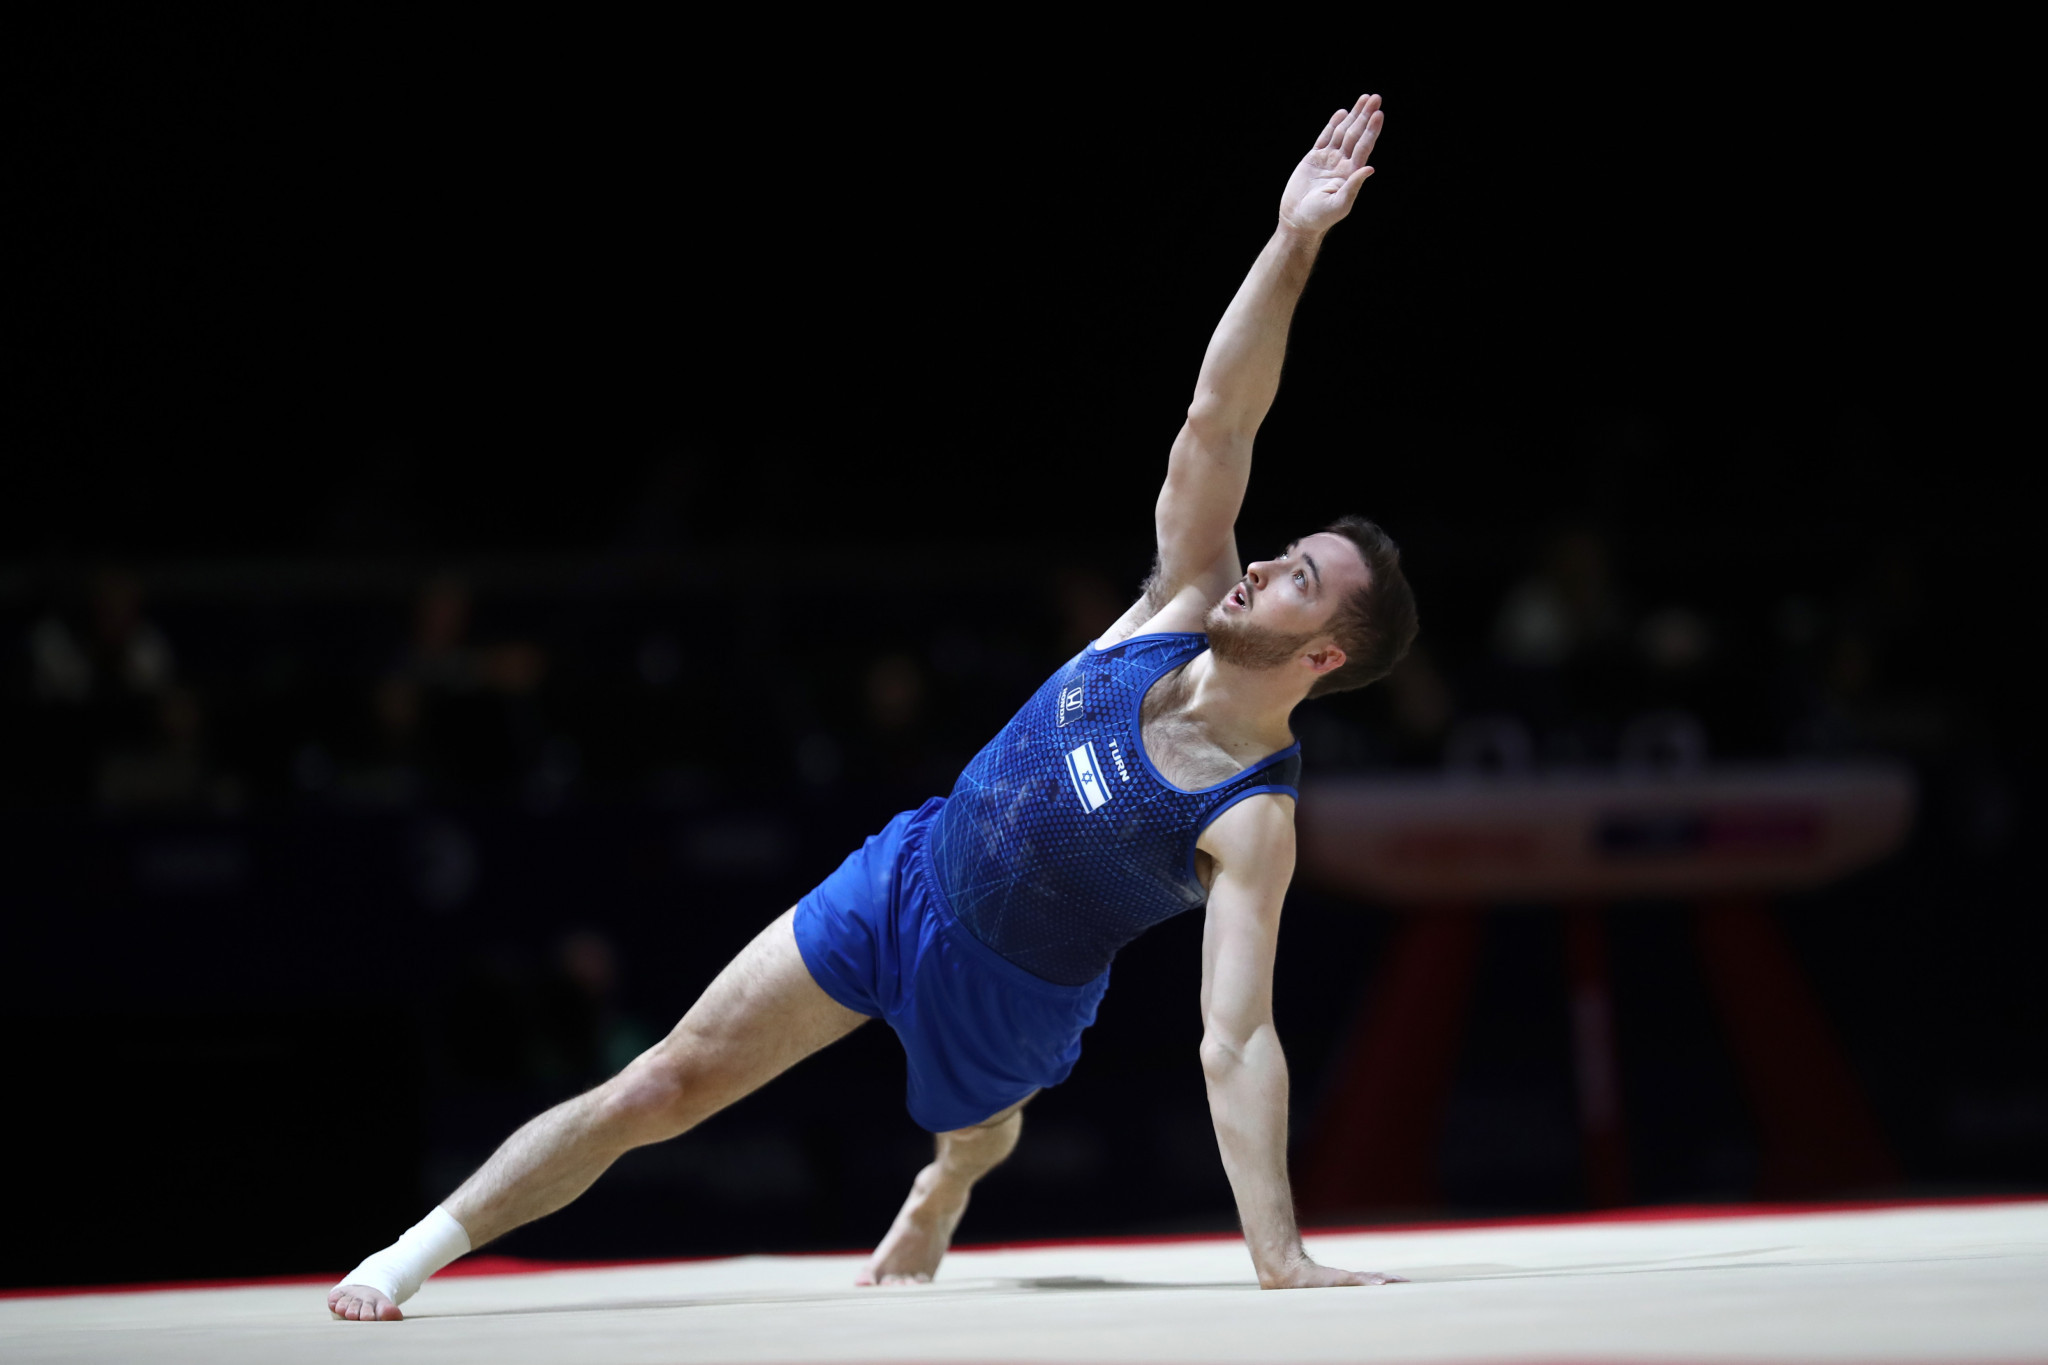 Dolgopyat shines on opening day of FIG Individual Apparatus World Cup